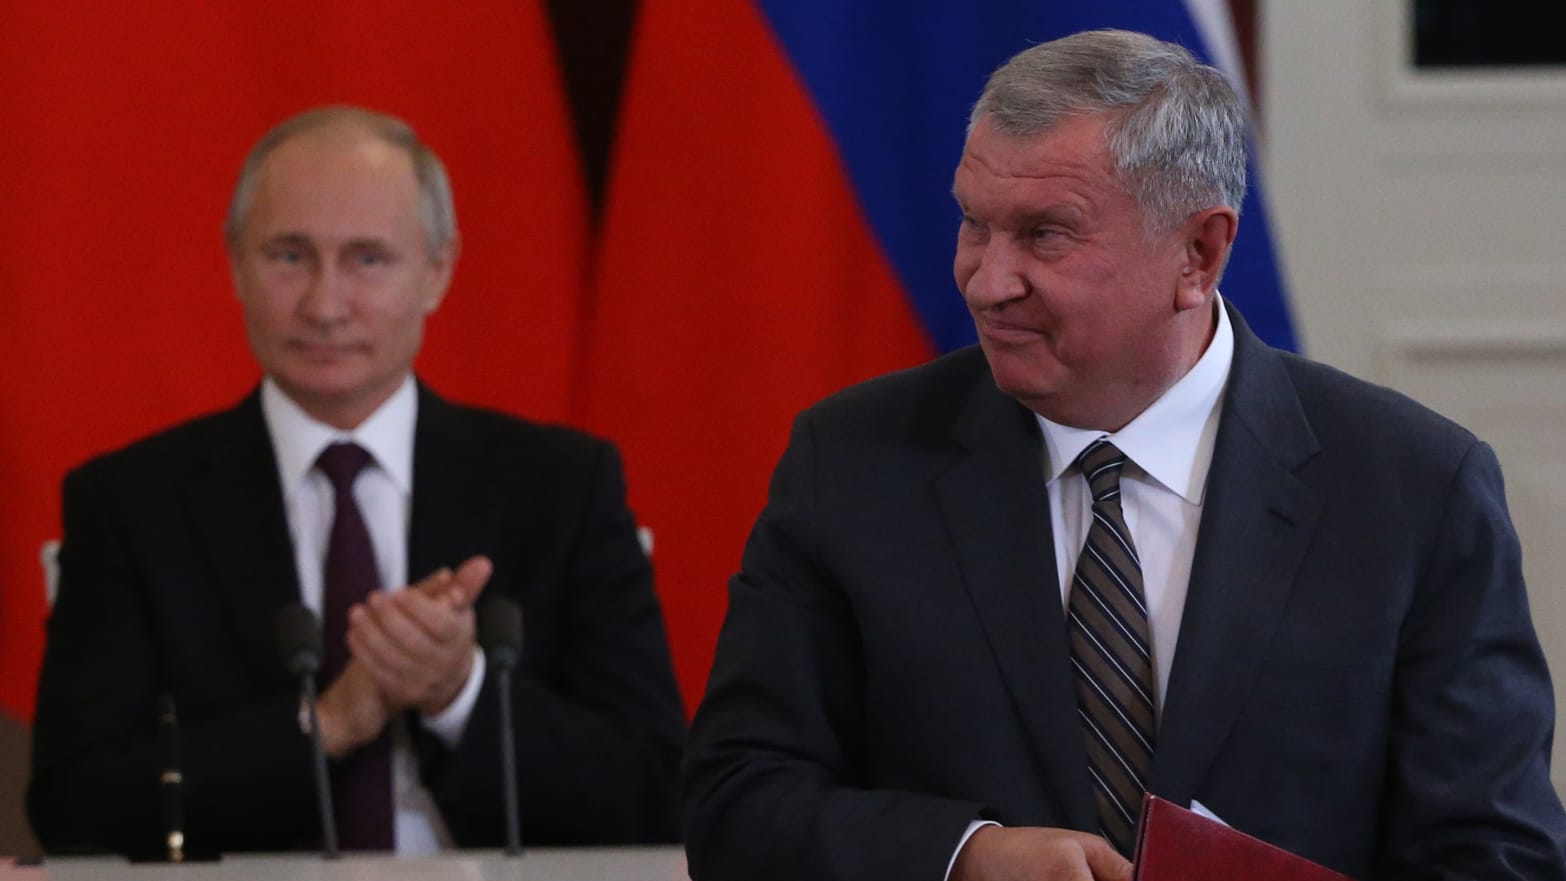  Russian President Vladimir Putin (L) looks at Rosneft President Igor Sechin (R) during Russian-Chinese talks at the Grand Kremlin Palace  in Moscow, Russia.